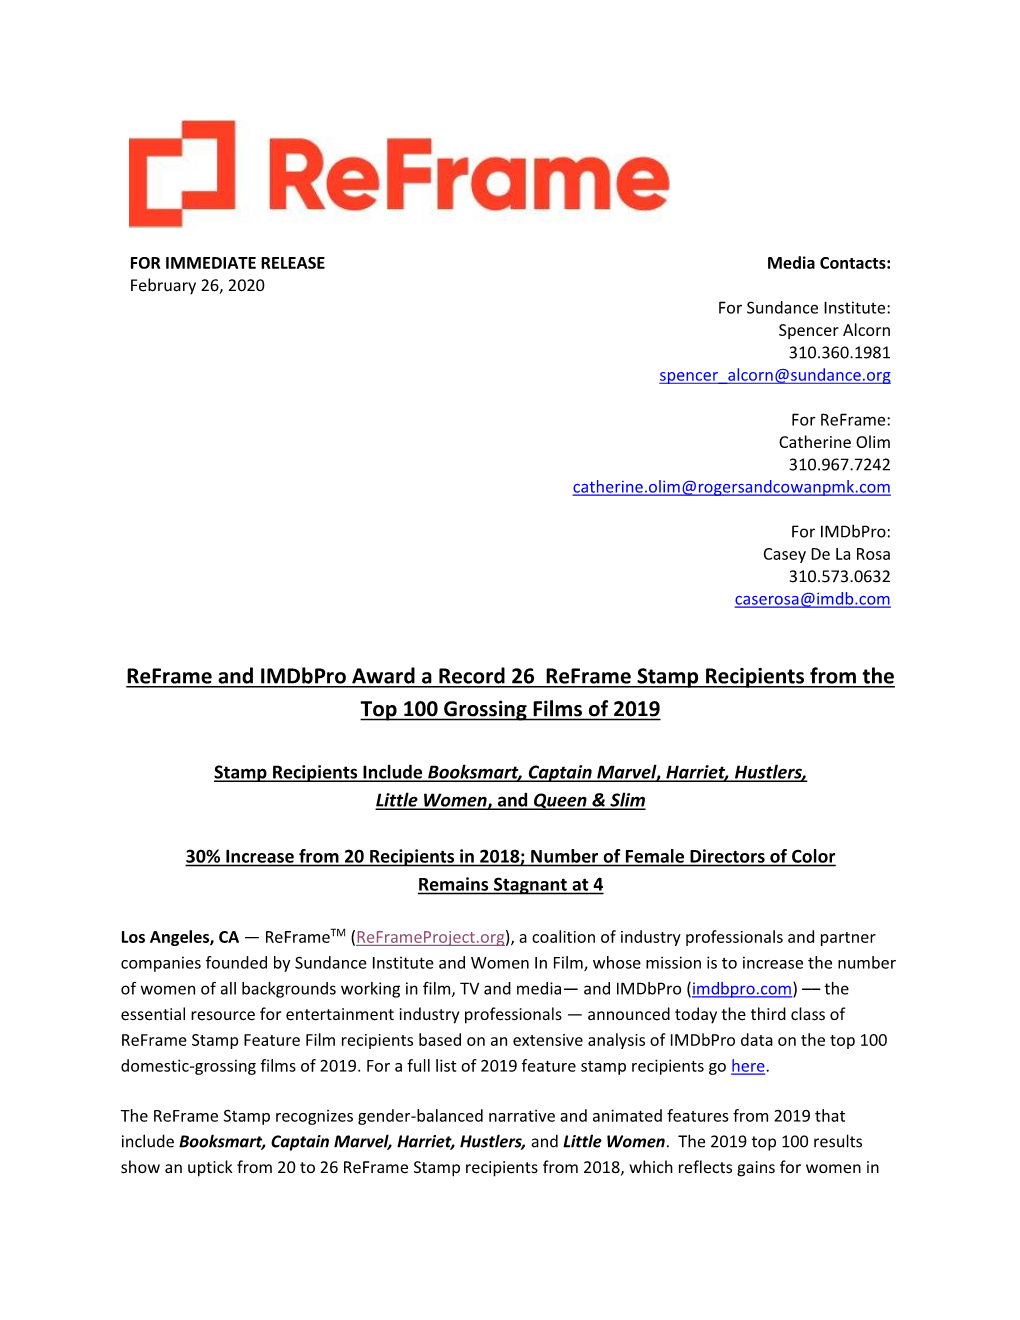 Reframe and Imdbpro Award a Record 26 Reframe Stamp Recipients from the Top 100 Grossing Films of 2019